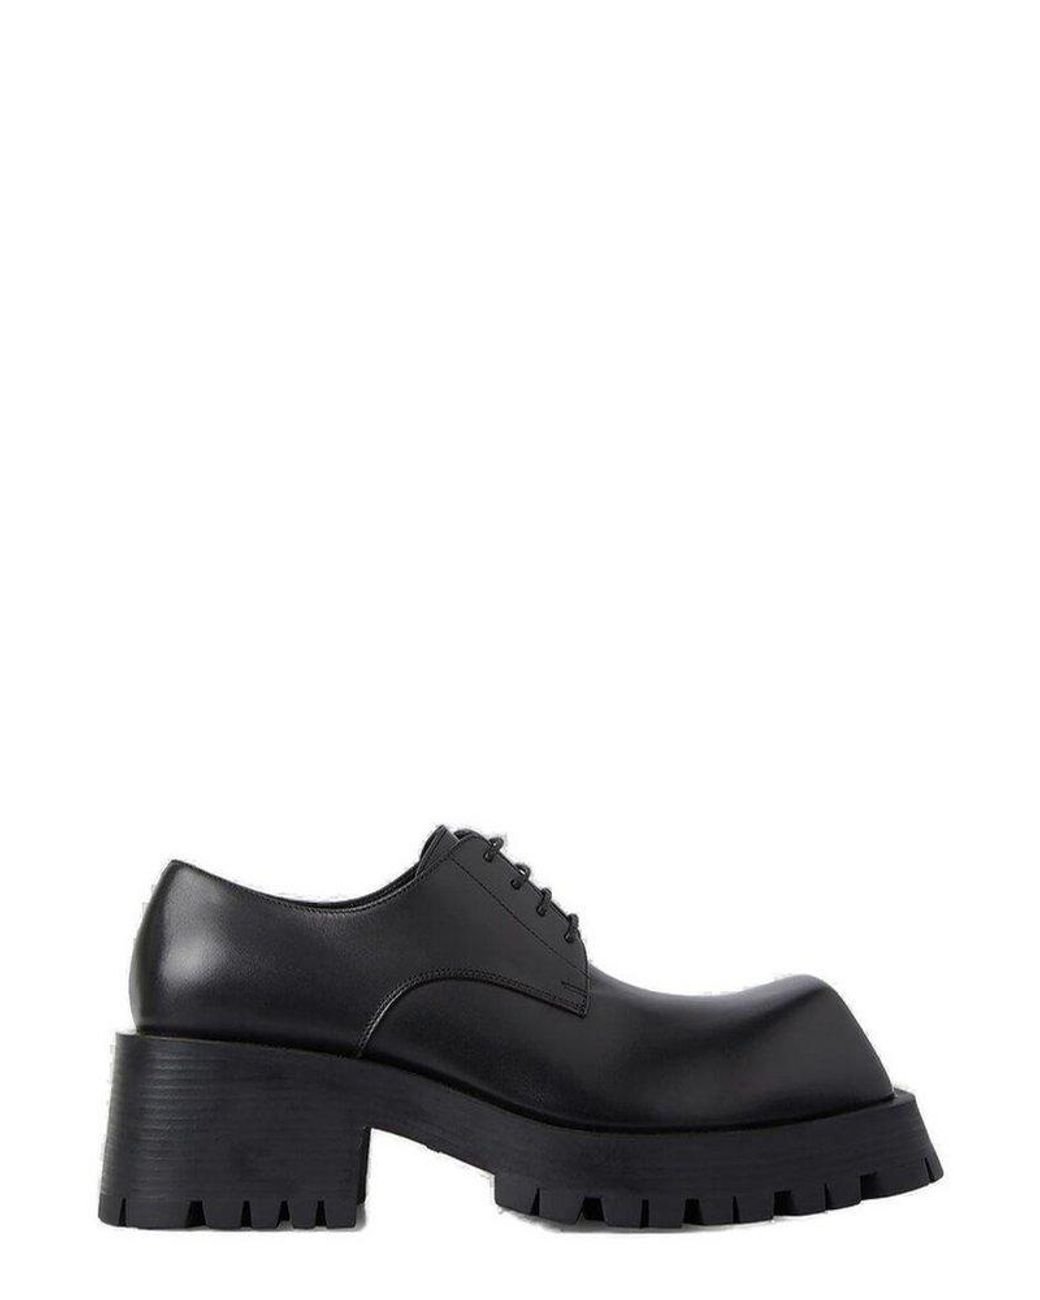 Balenciaga Trooper Chunky Heeled Loafers in Black | Lyst